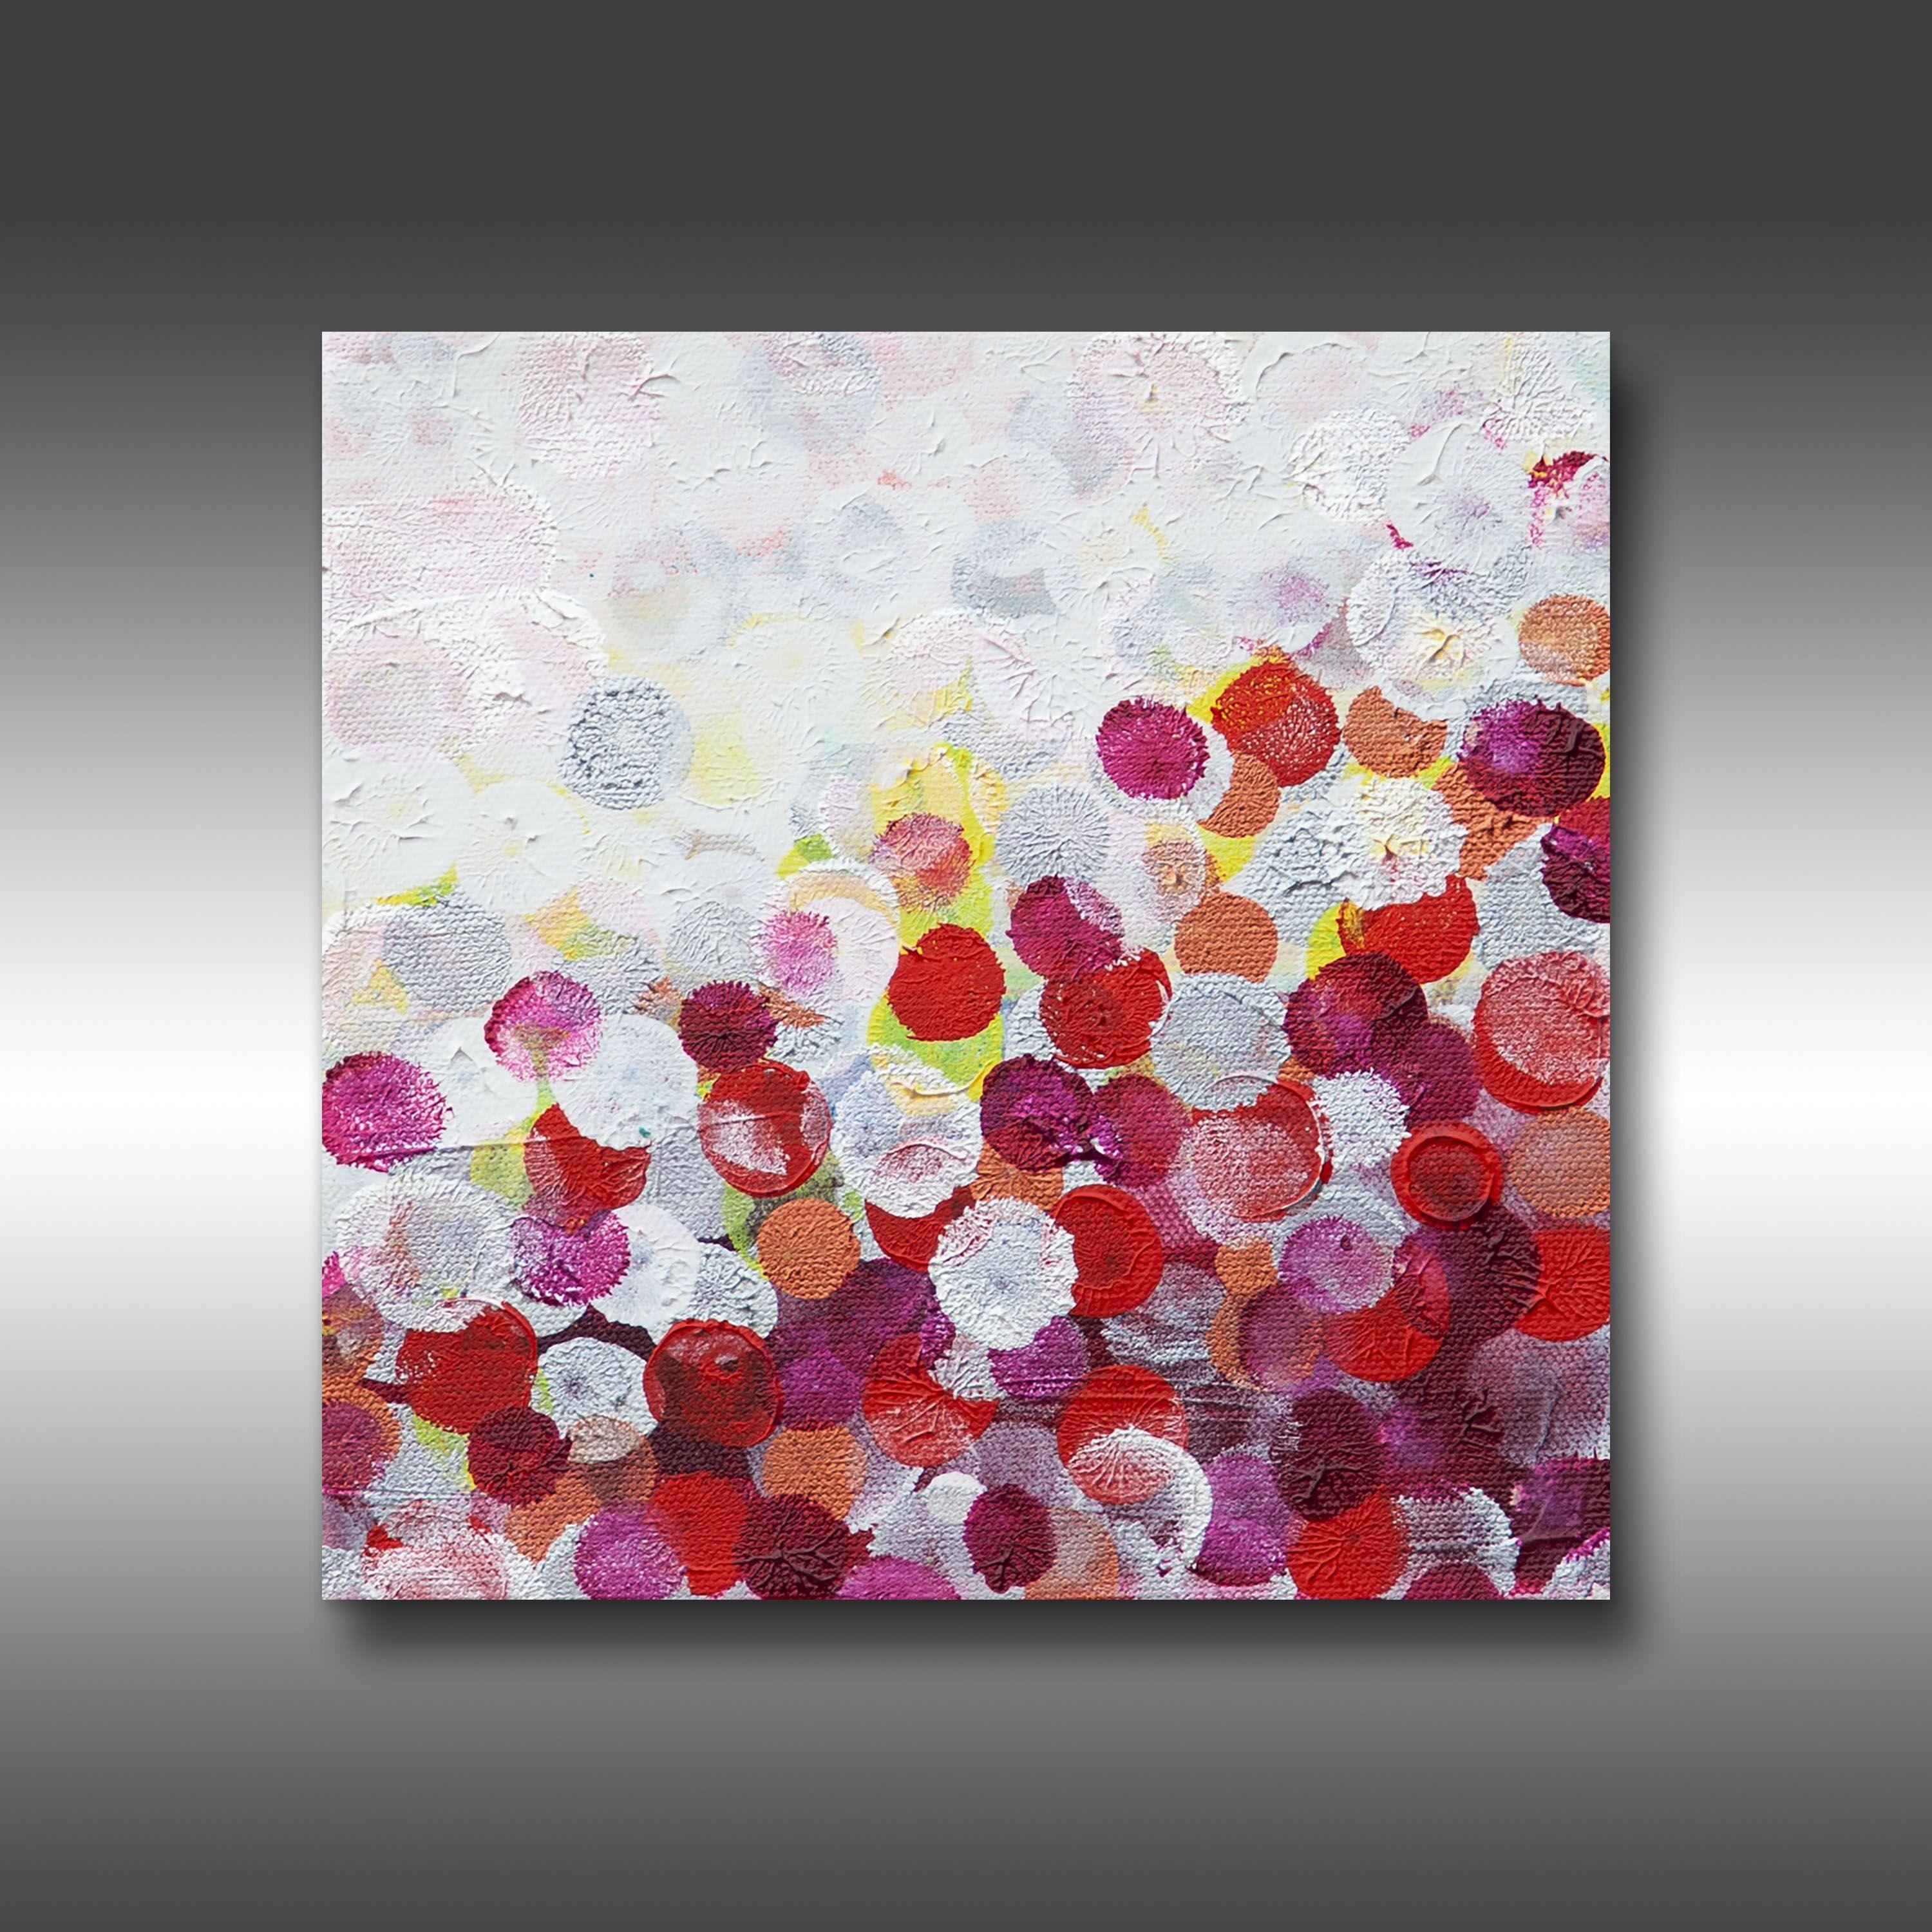 Infinity 4 is an original painting, created with acrylic paint on gallery-wrapped canvas. It has a width of 8 inches and a height of 8 inches with a depth of 1.5 inches (8x8x1.5). The colors used in the painting are white, red, fuchsia, pink,